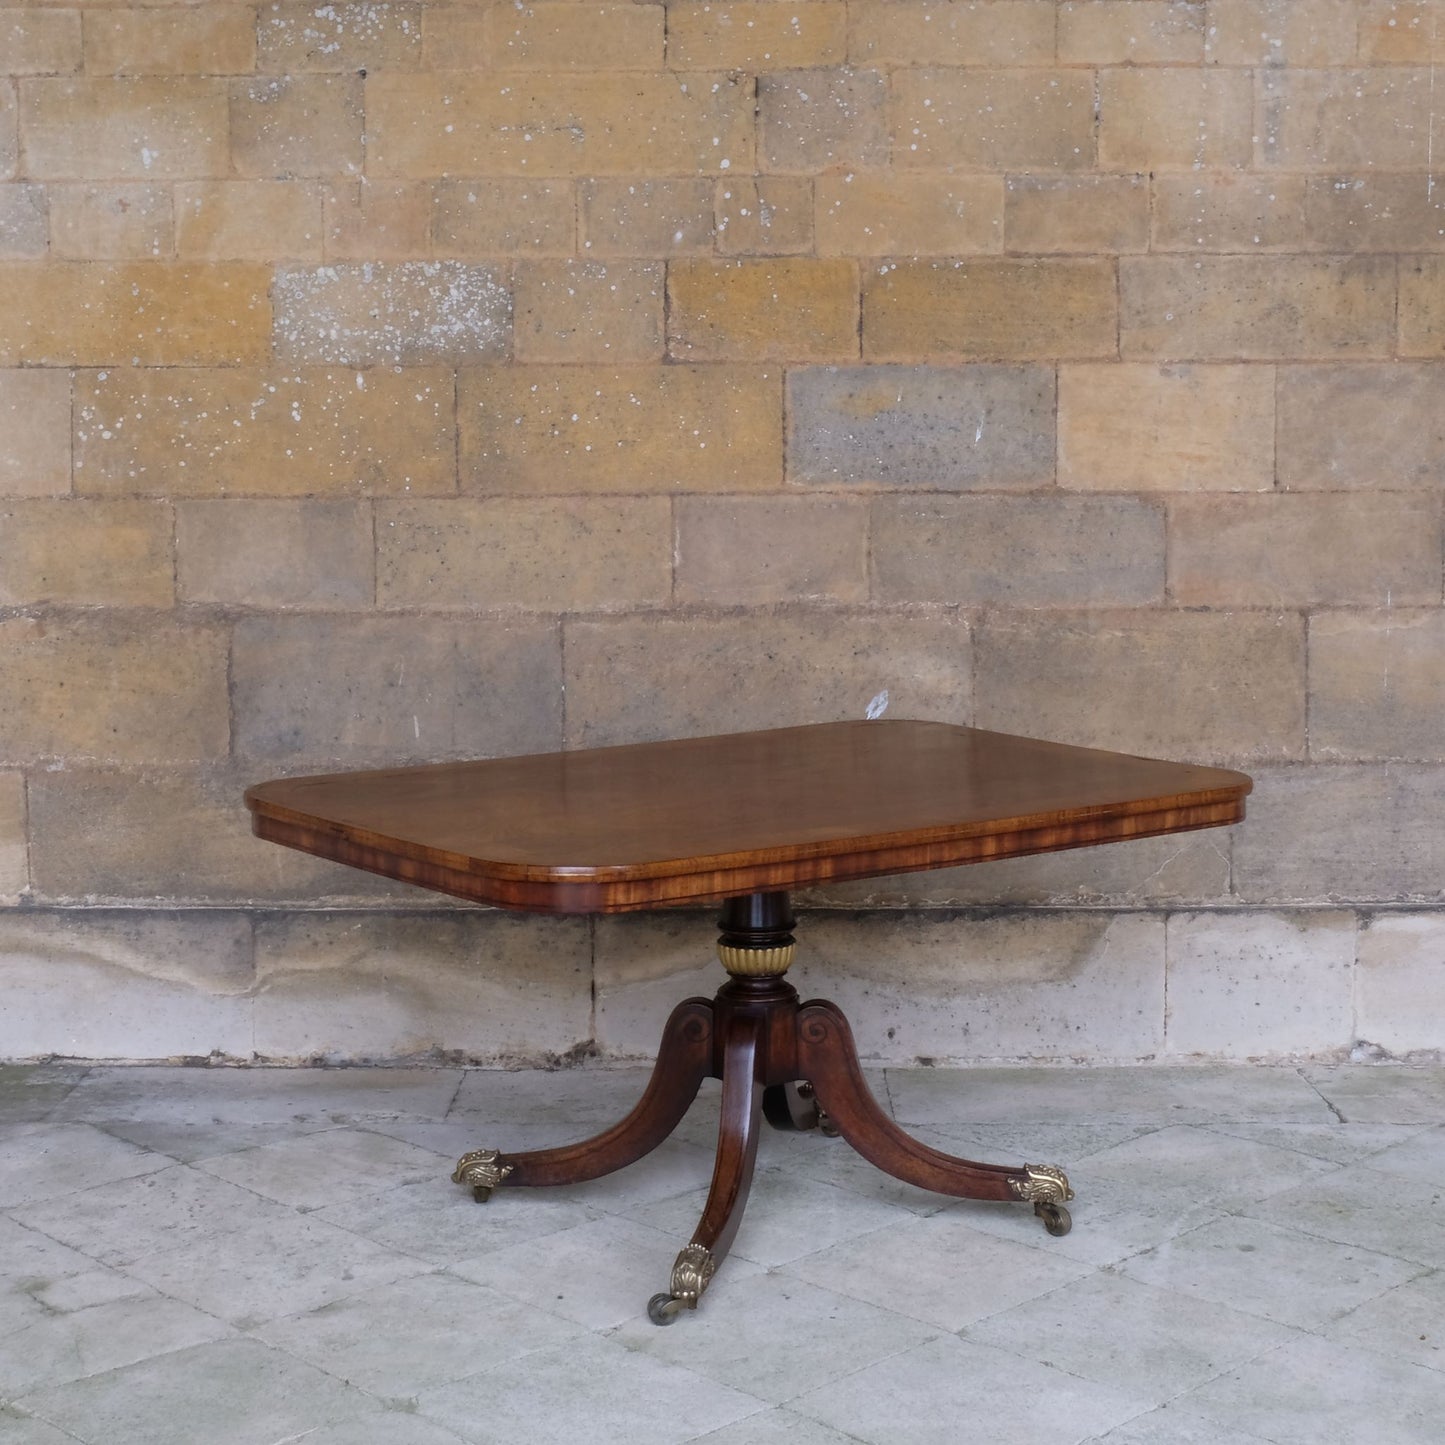 A fine Regency brass inlaid breakfast table, the rounded rectangular crossbanded tilt-top upon a turned and part gilt column support on four splayed legs with elegant tulipwood spiral inlay, showing a patina and wear commensurate with age and use, otherwise in very good condition